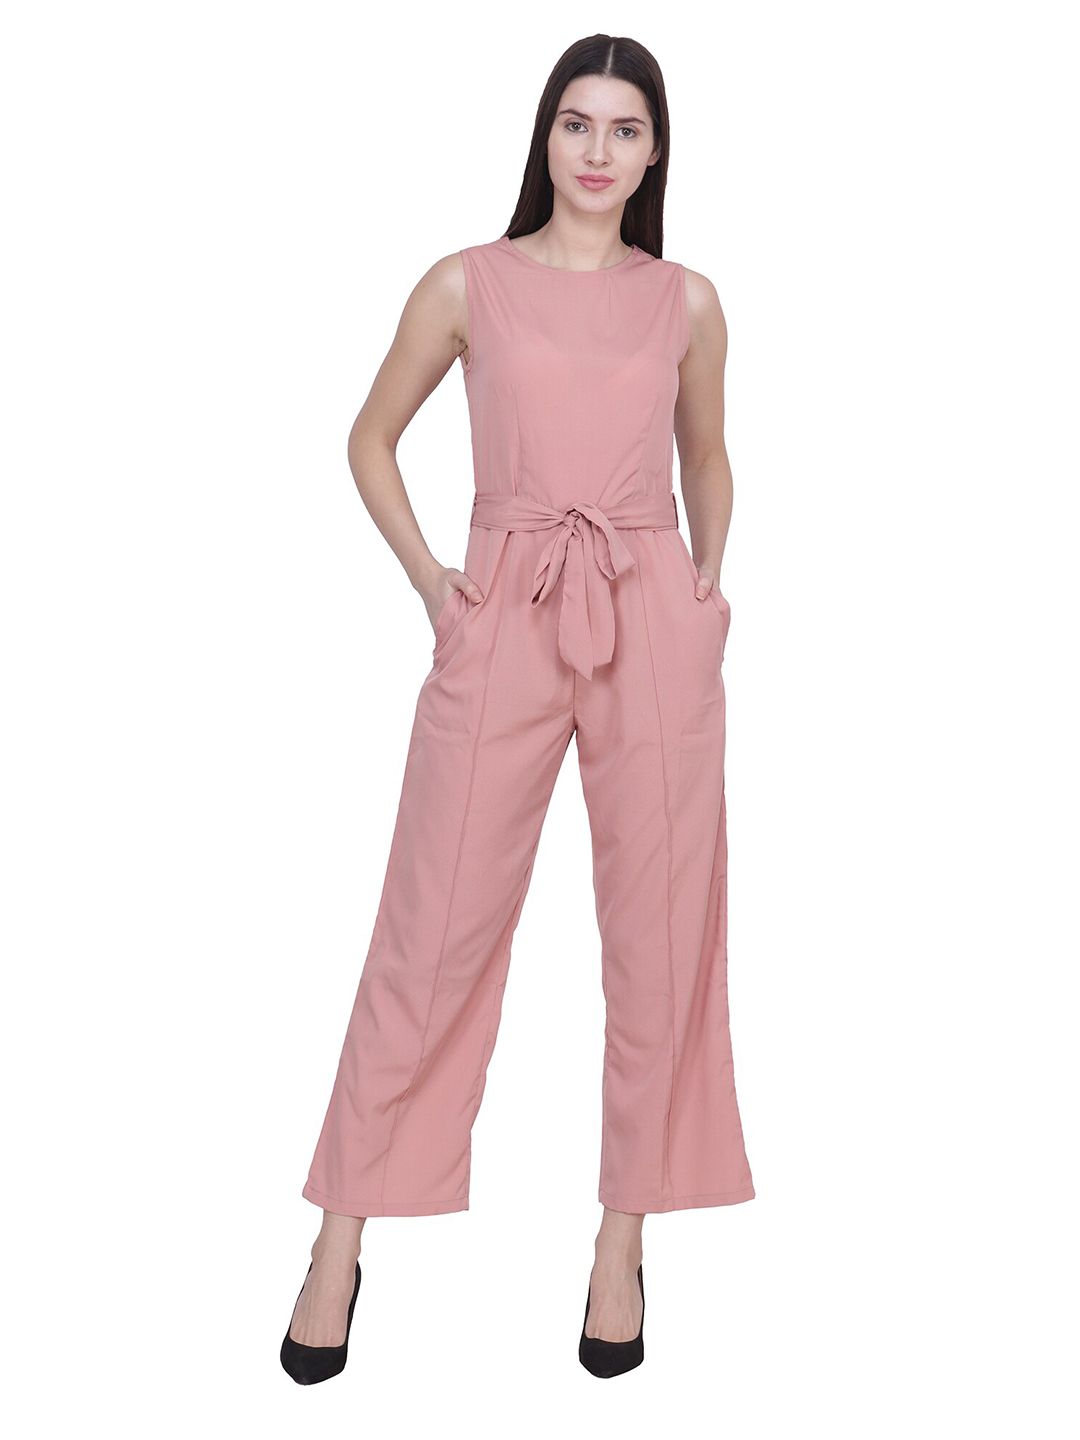 Frempy Peach-Coloured Basic Jumpsuit Price in India